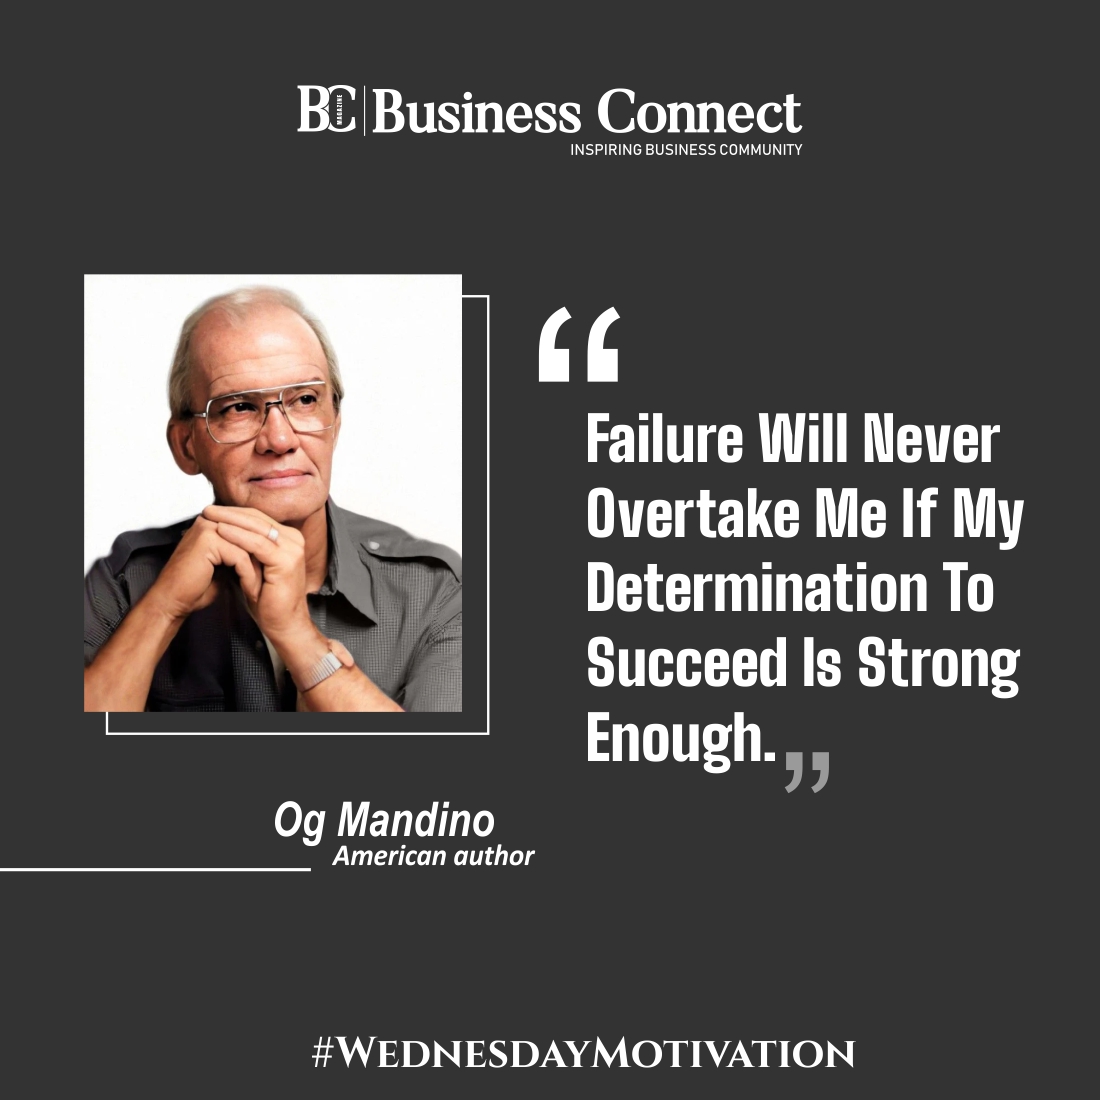 'Failure will never overtake me if my determination to succeed is strong enough.' – Og Mandino

#OgMandino #OgMandinoquote #OgMandinoquotes #motivation #motivationoftheday #dailyinspiration #morningvibe #wednesday #quotesoftheday #motivationdaily #positivevibes #positivequote